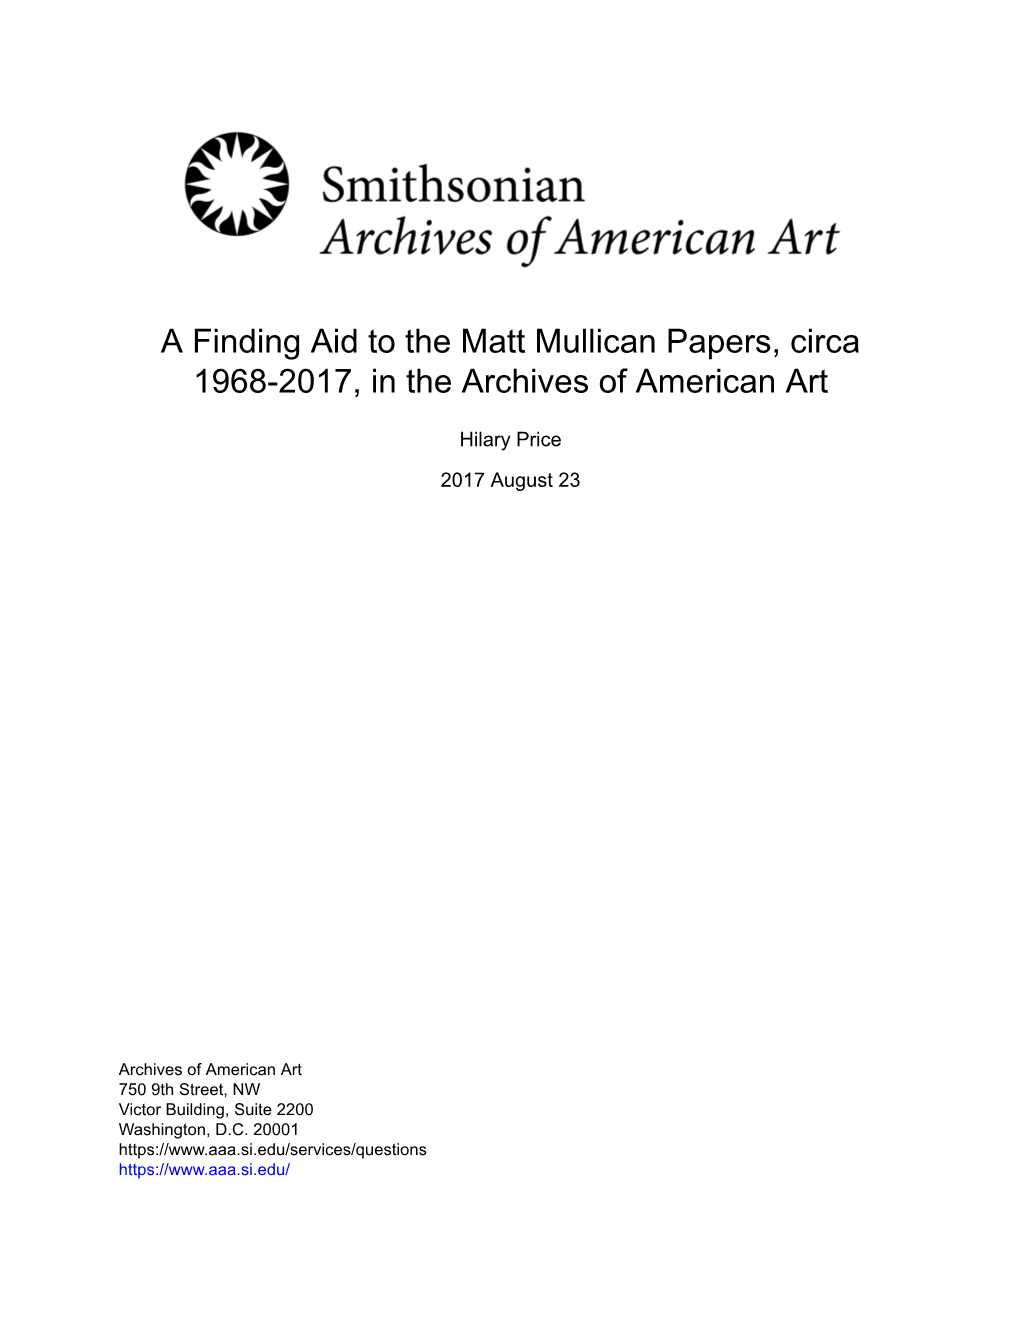 A Finding Aid to the Matt Mullican Papers, Circa 1968-2017, in the Archives of American Art